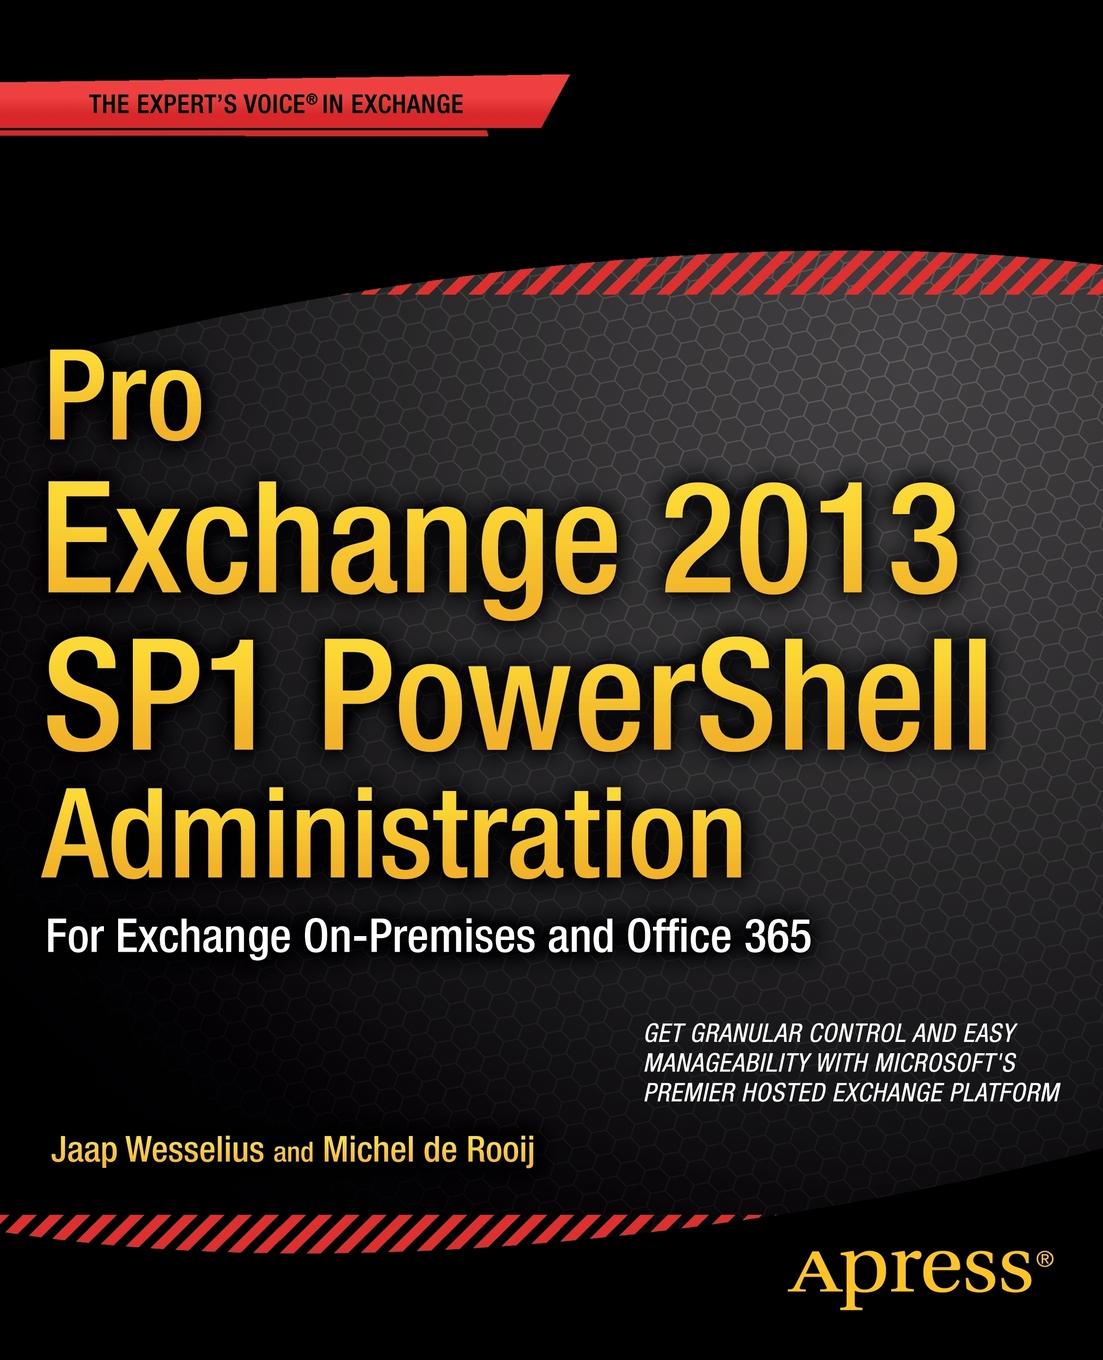 Pro Exchange 2013 SP1 PowerShell Administration. For Exchange On-Premises and Office 365